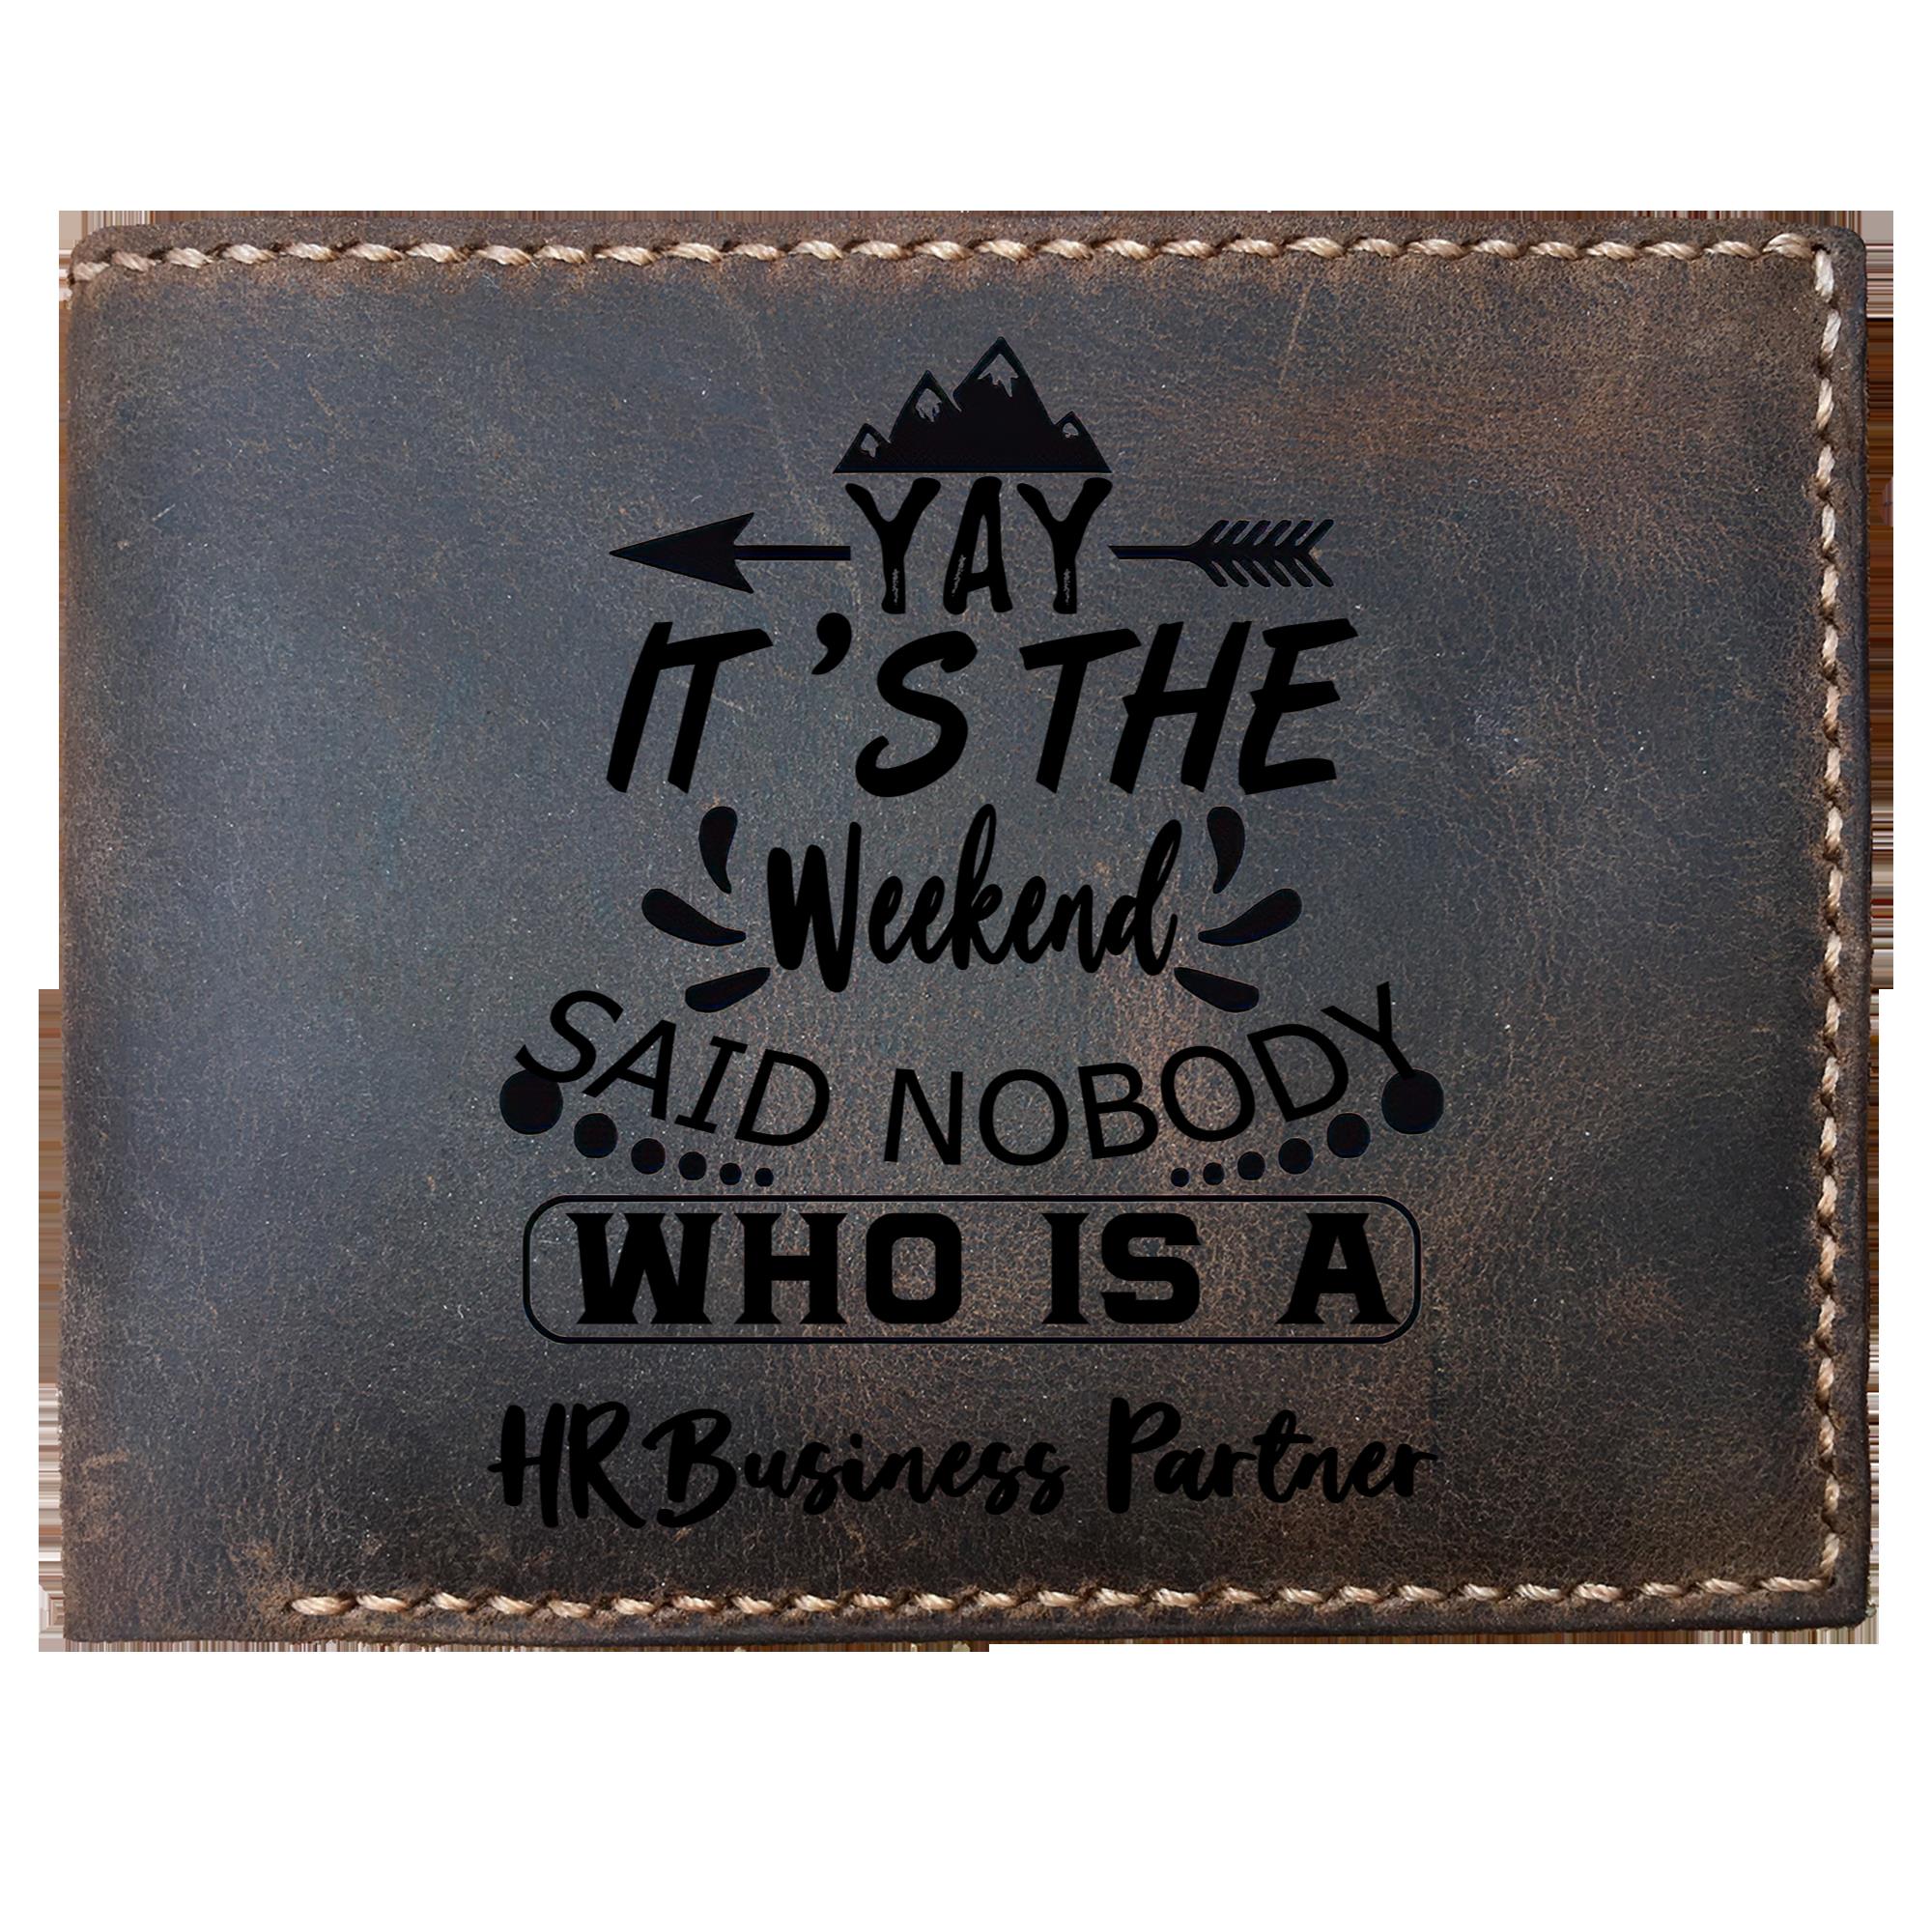 Skitongifts Funny Custom Laser Engraved Bifold Leather Wallet For Men, It's The Weekend Said Nobody Who Is A HR Business Partner, Father's Day Gifts